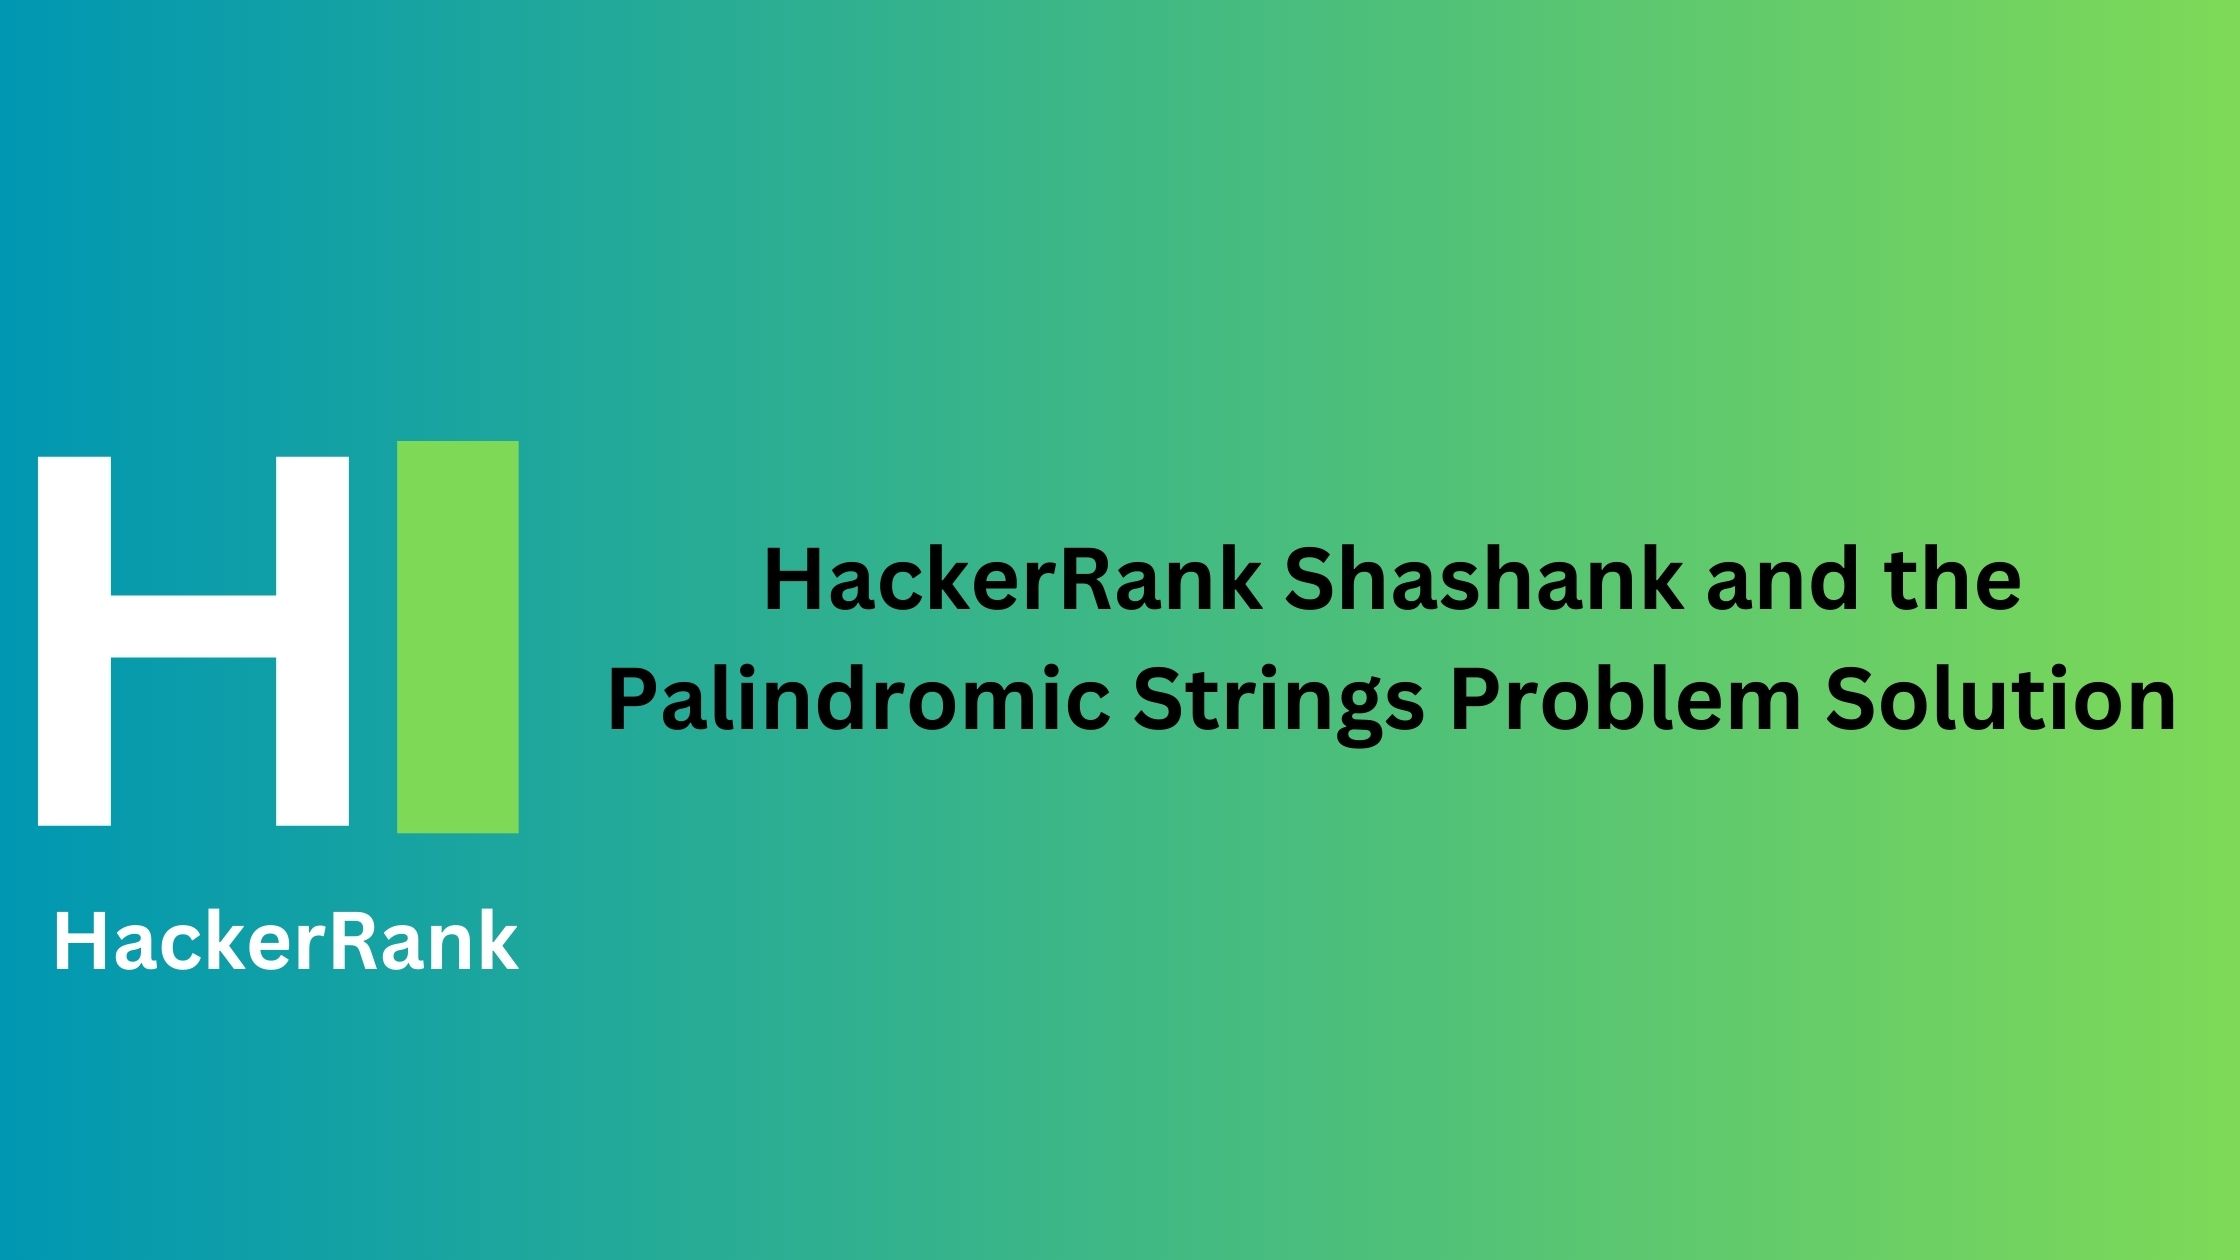 HackerRank Shashank and the Palindromic Strings Problem Solution